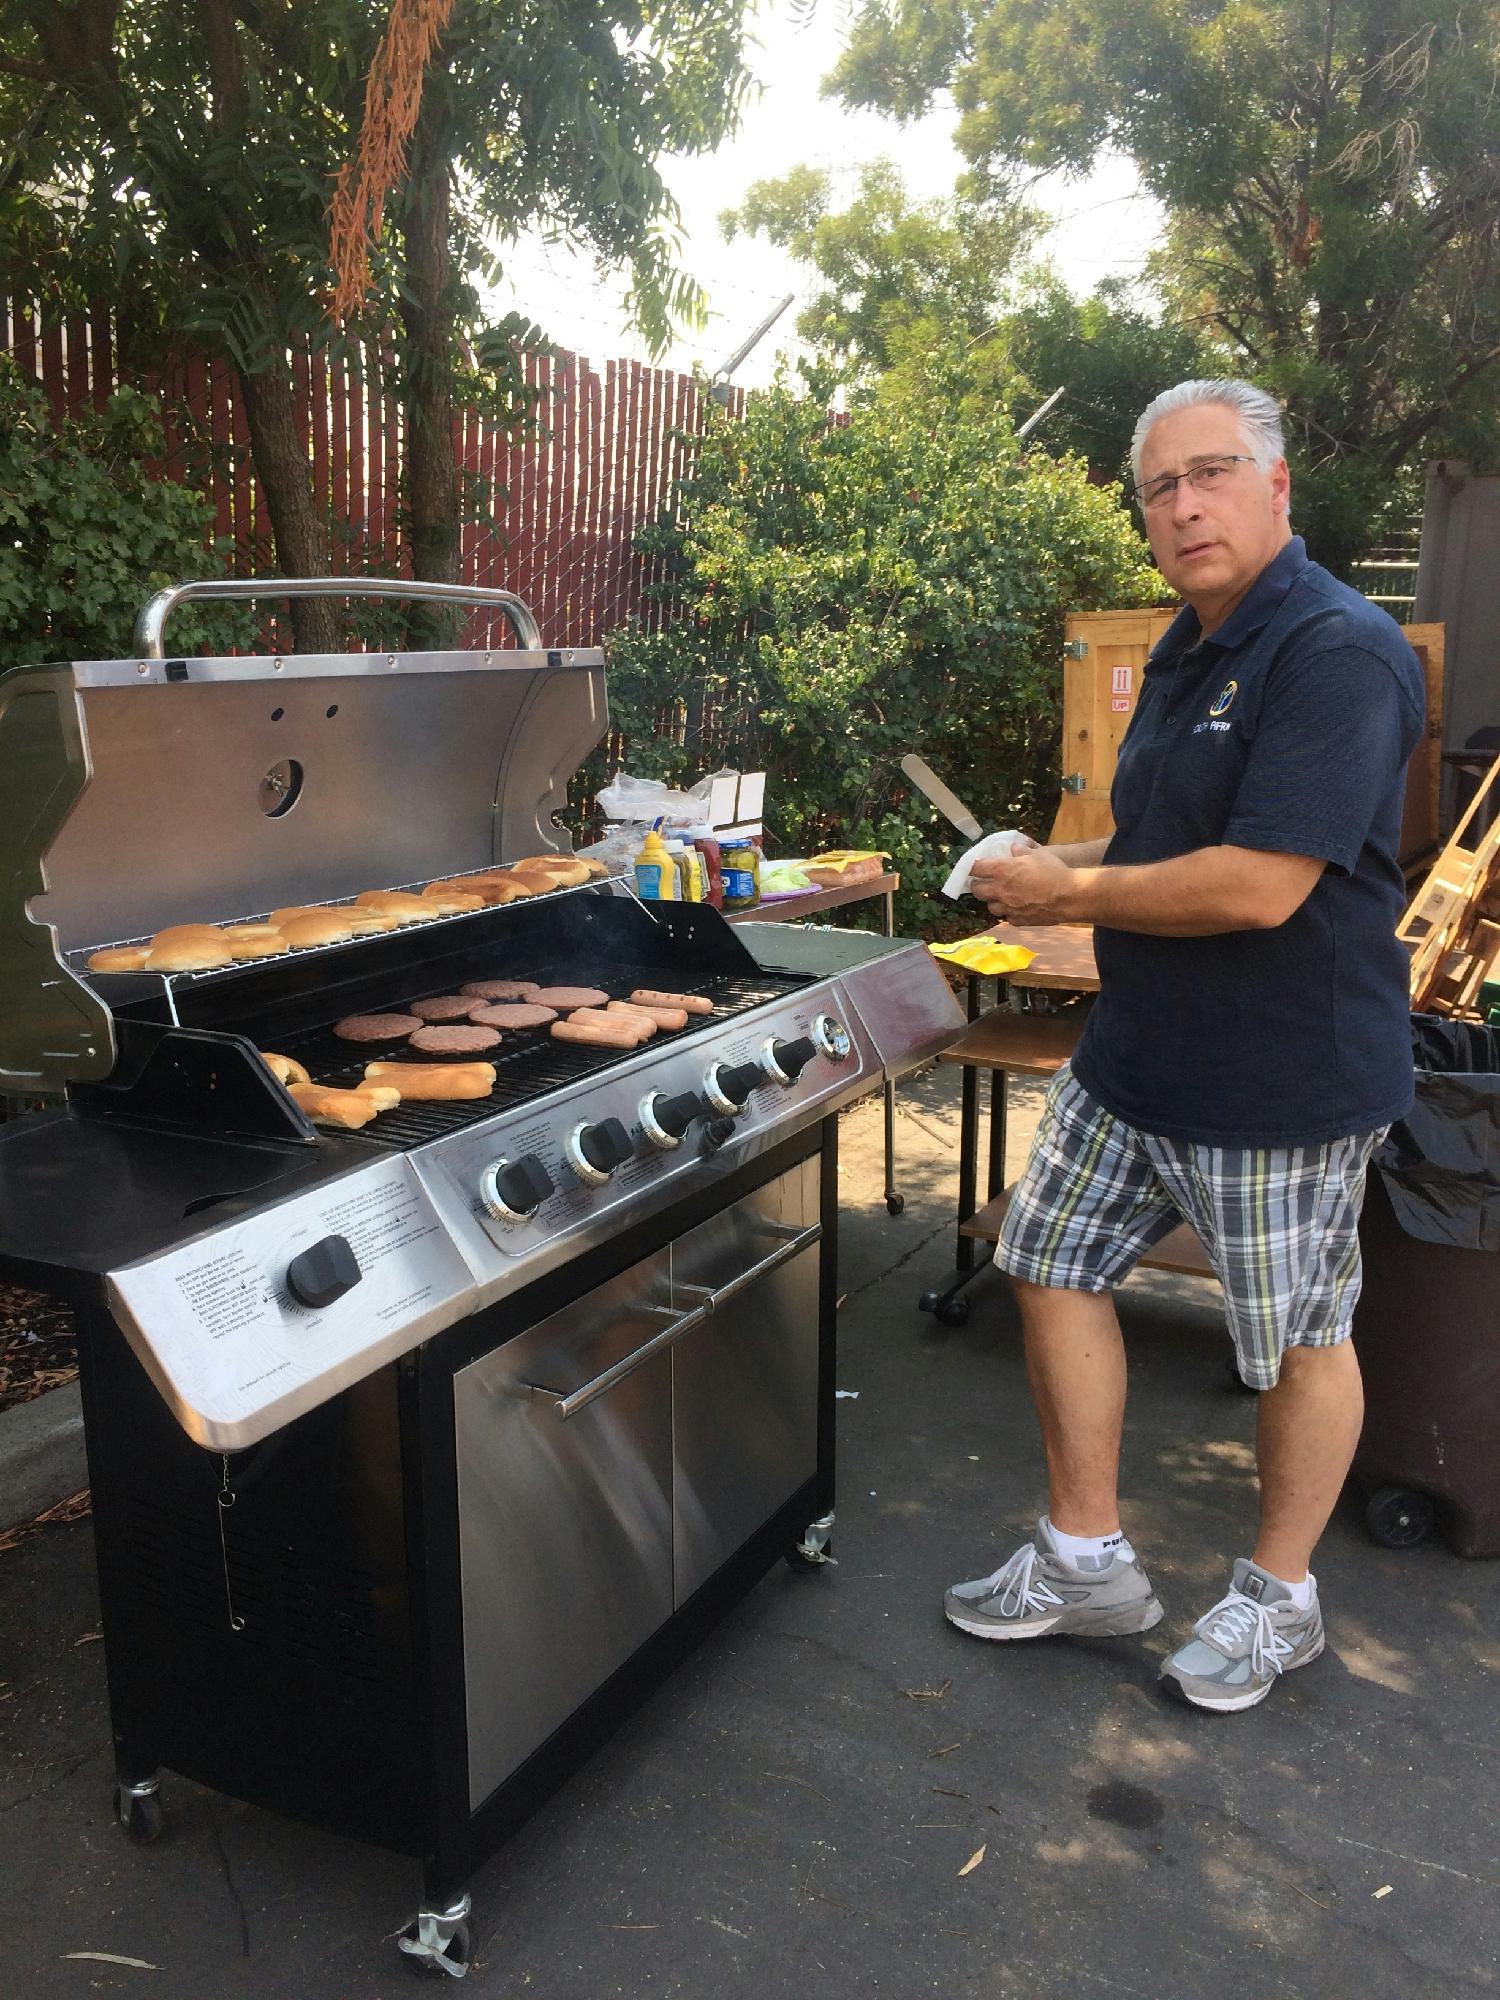 Cooking for weekly summer company barbecue